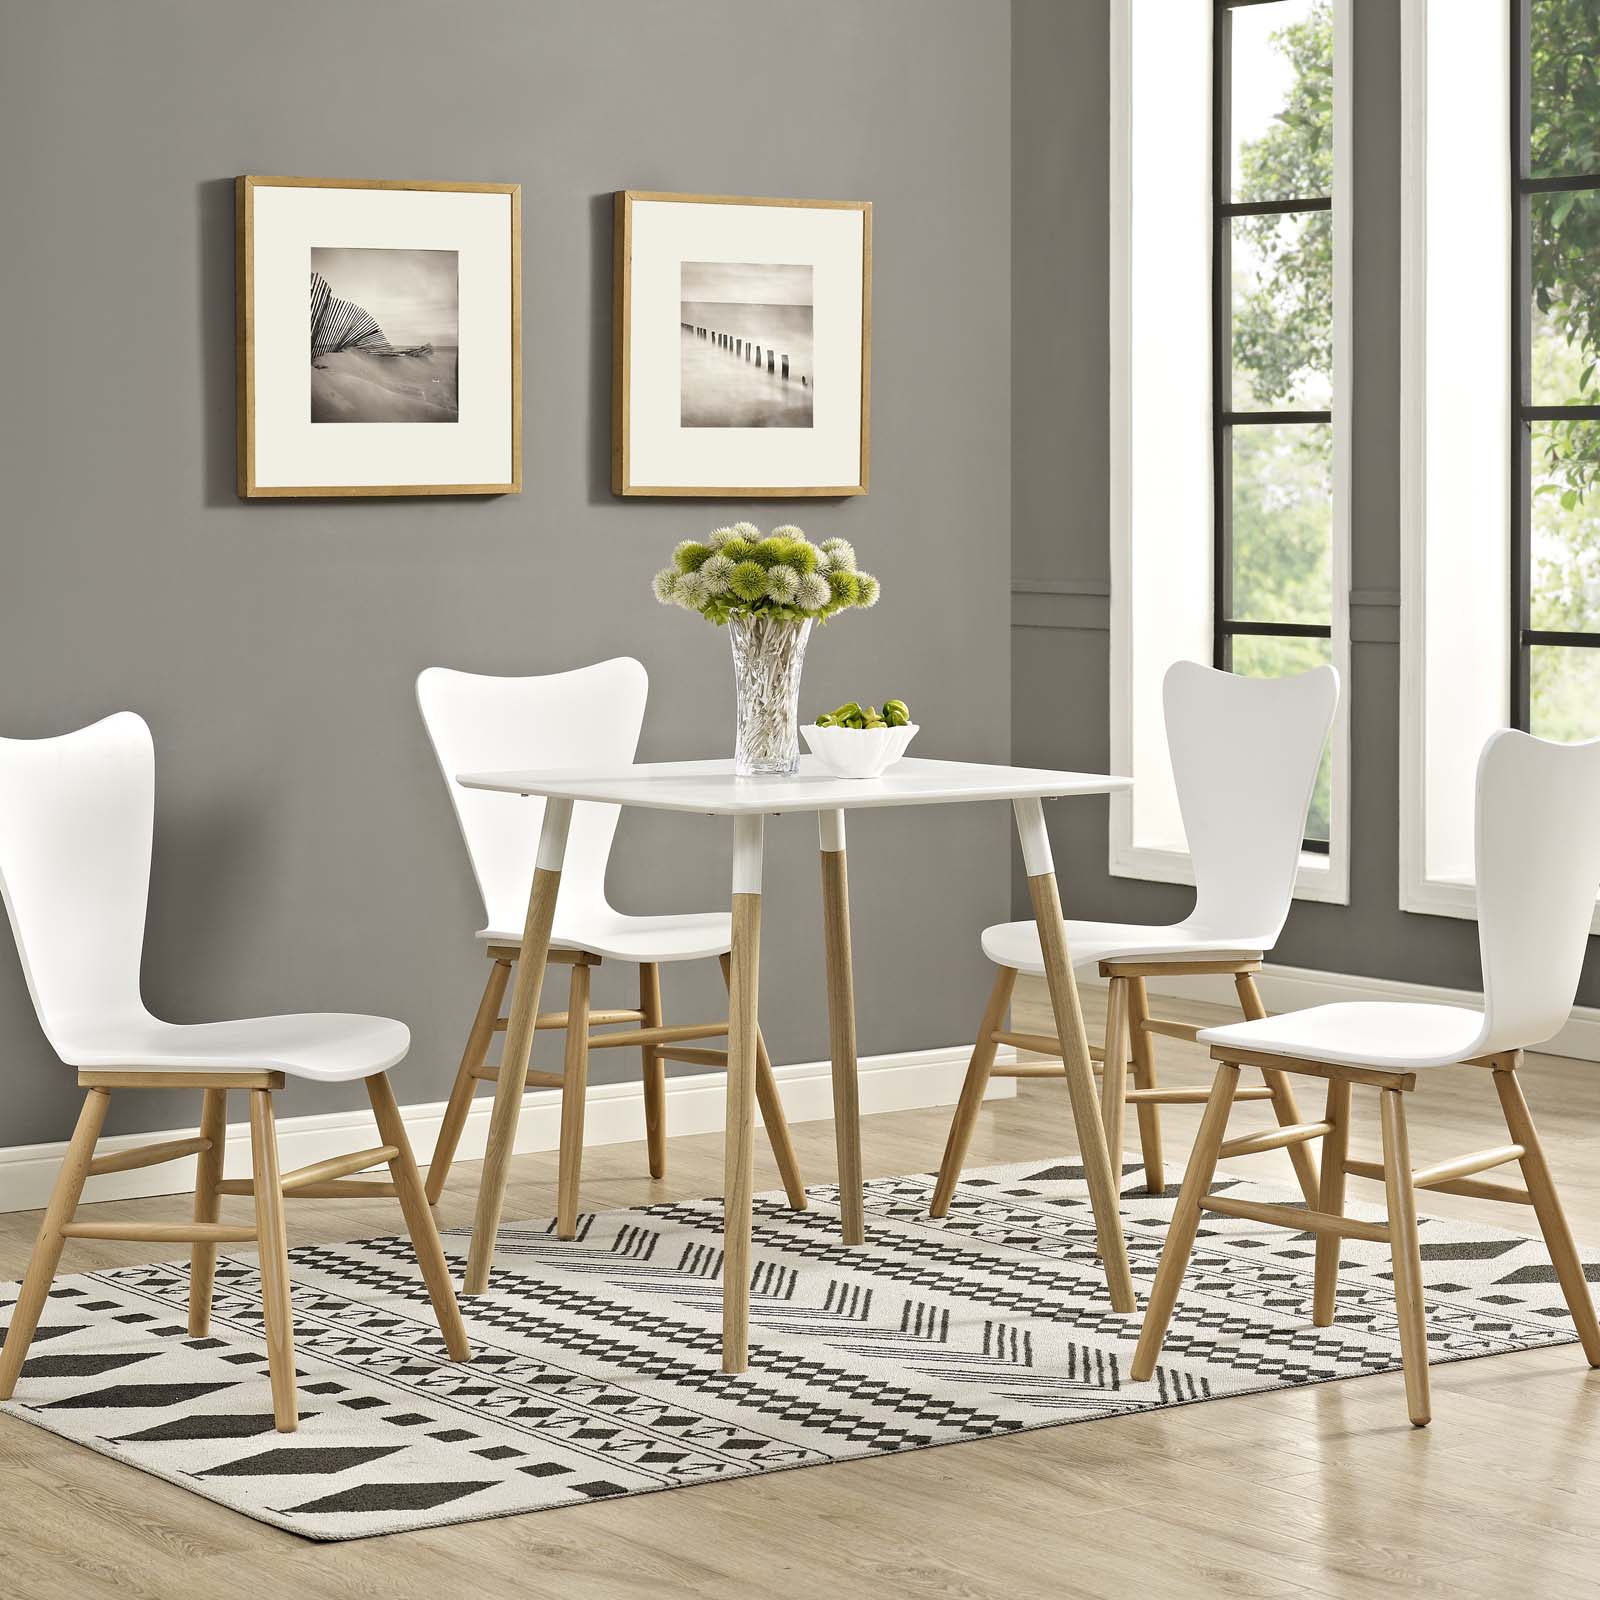 Continuum 28" Square Dining Table - East Shore Modern Home Furnishings